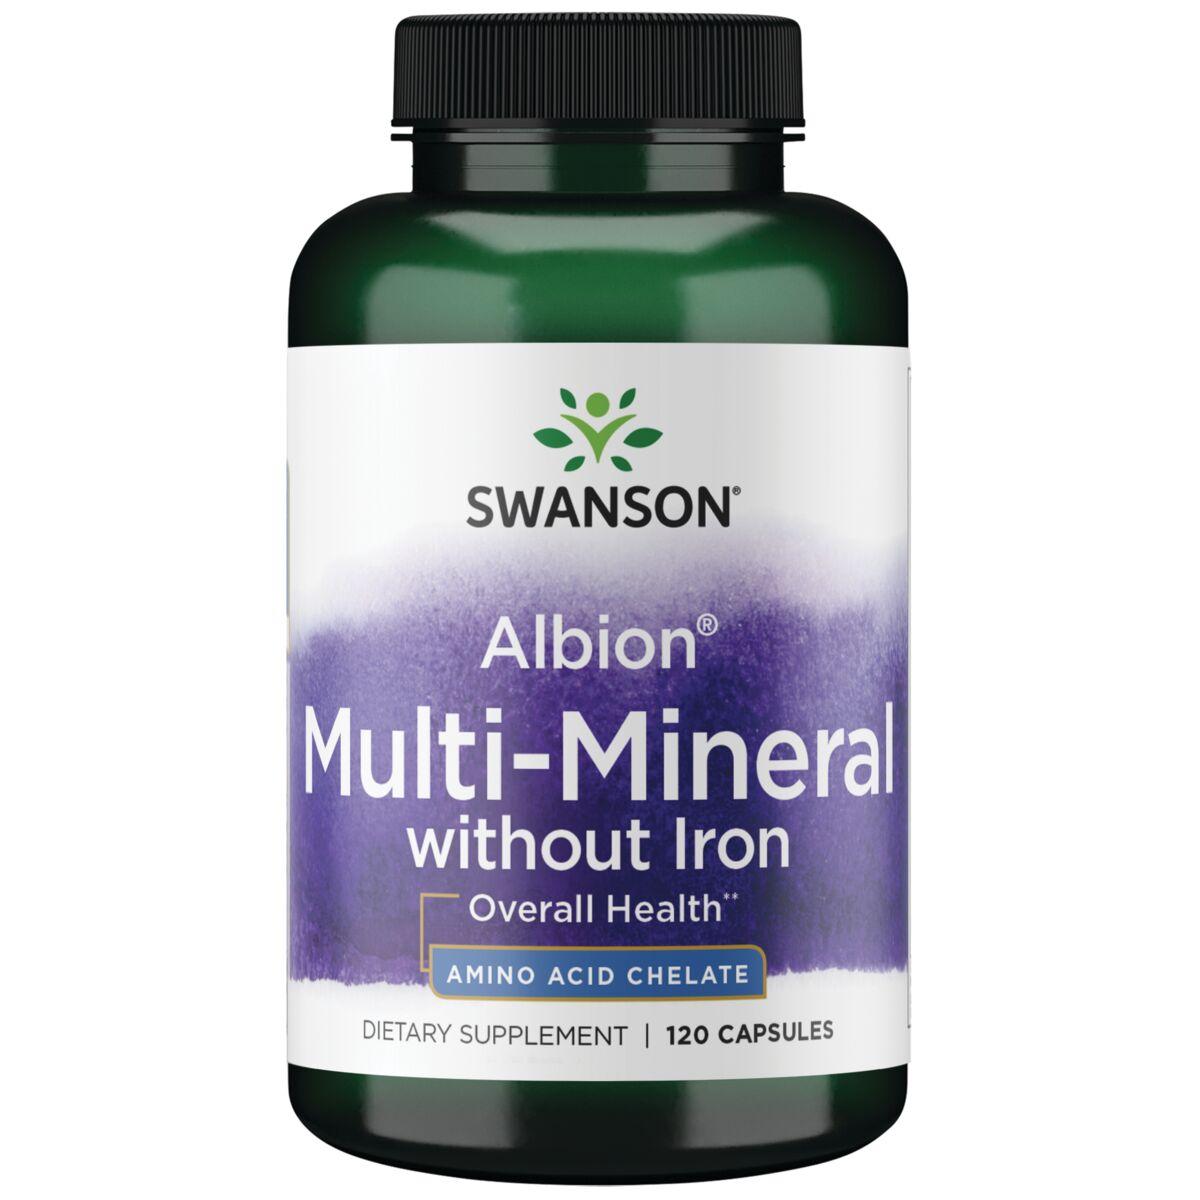 Swanson Ultra Albion Multi-Mineral without Iron Vitamin | 120 Caps